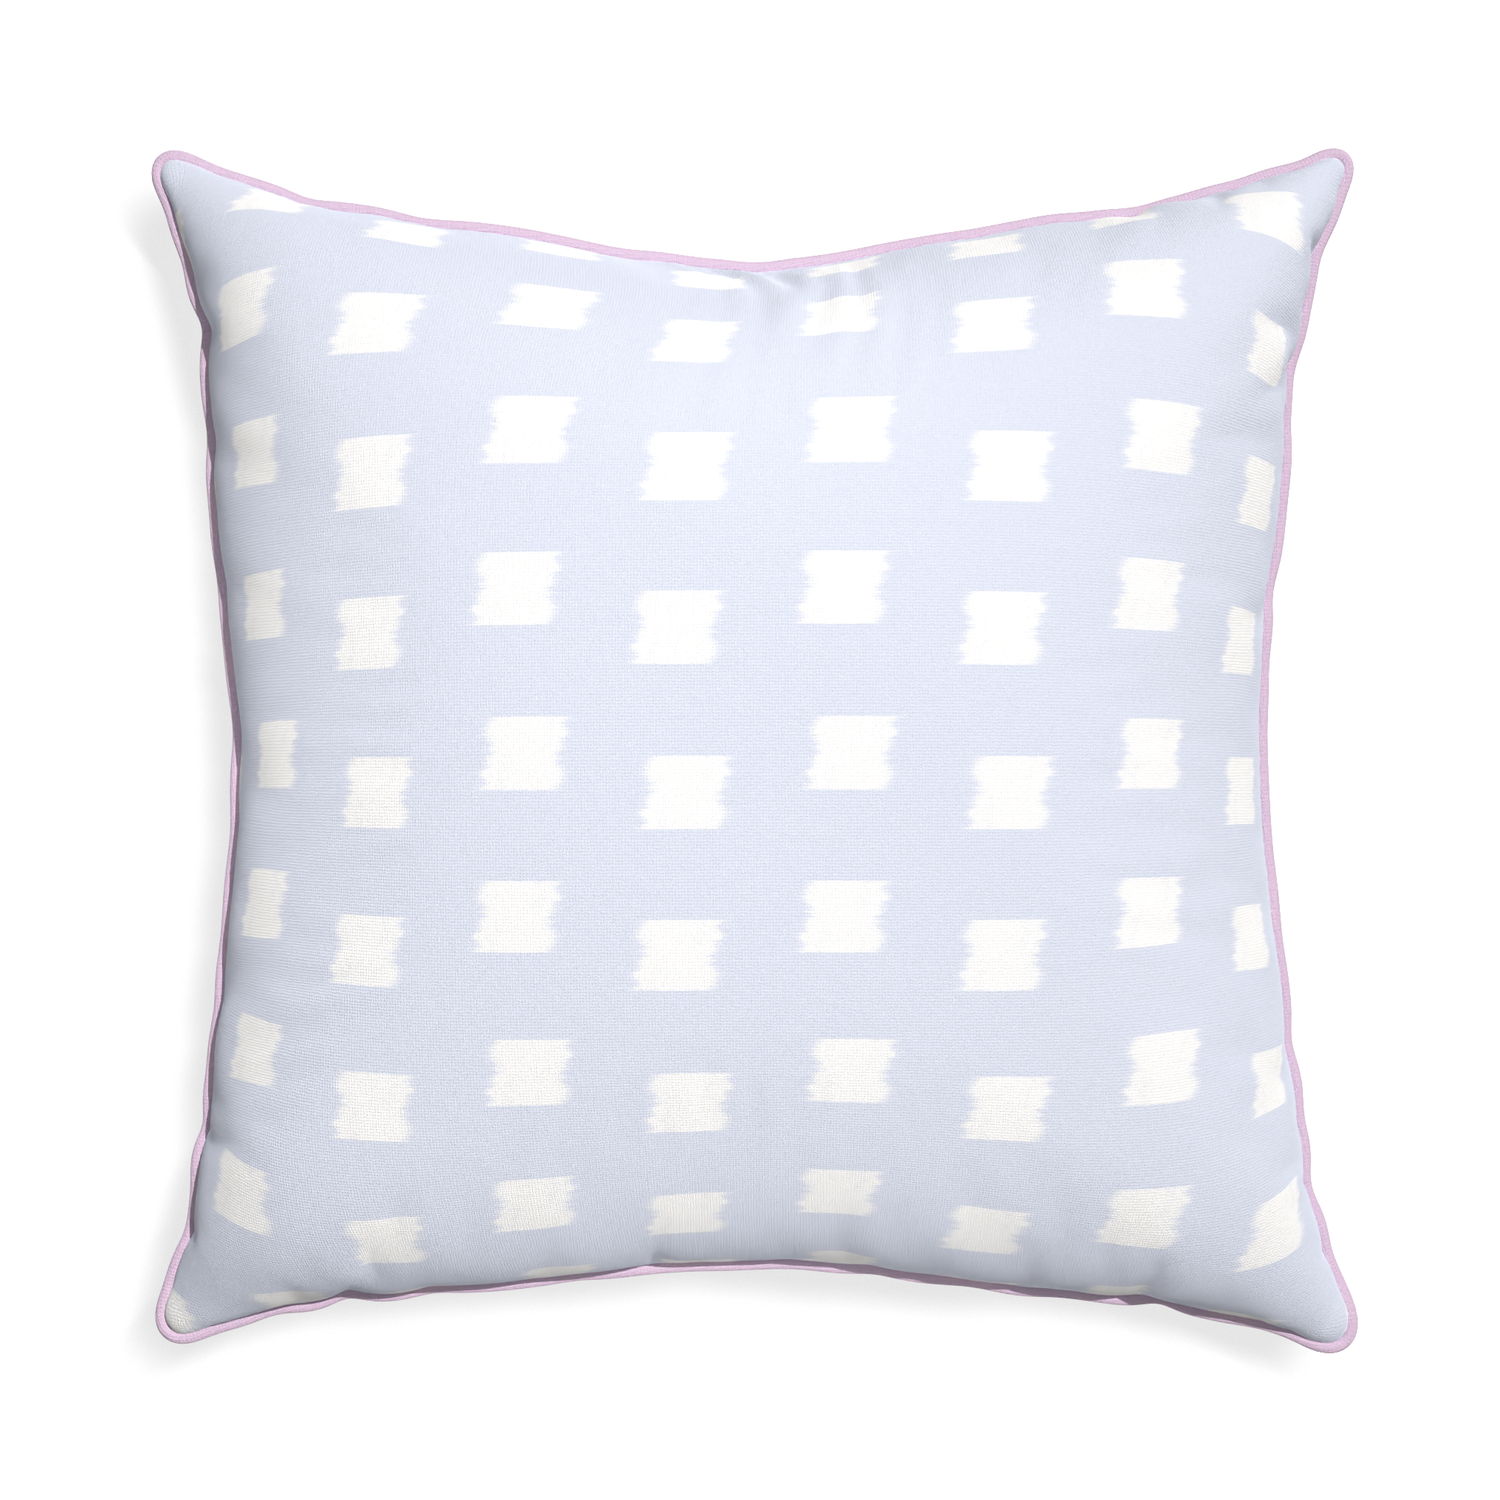 Euro-sham denton custom pillow with l piping on white background